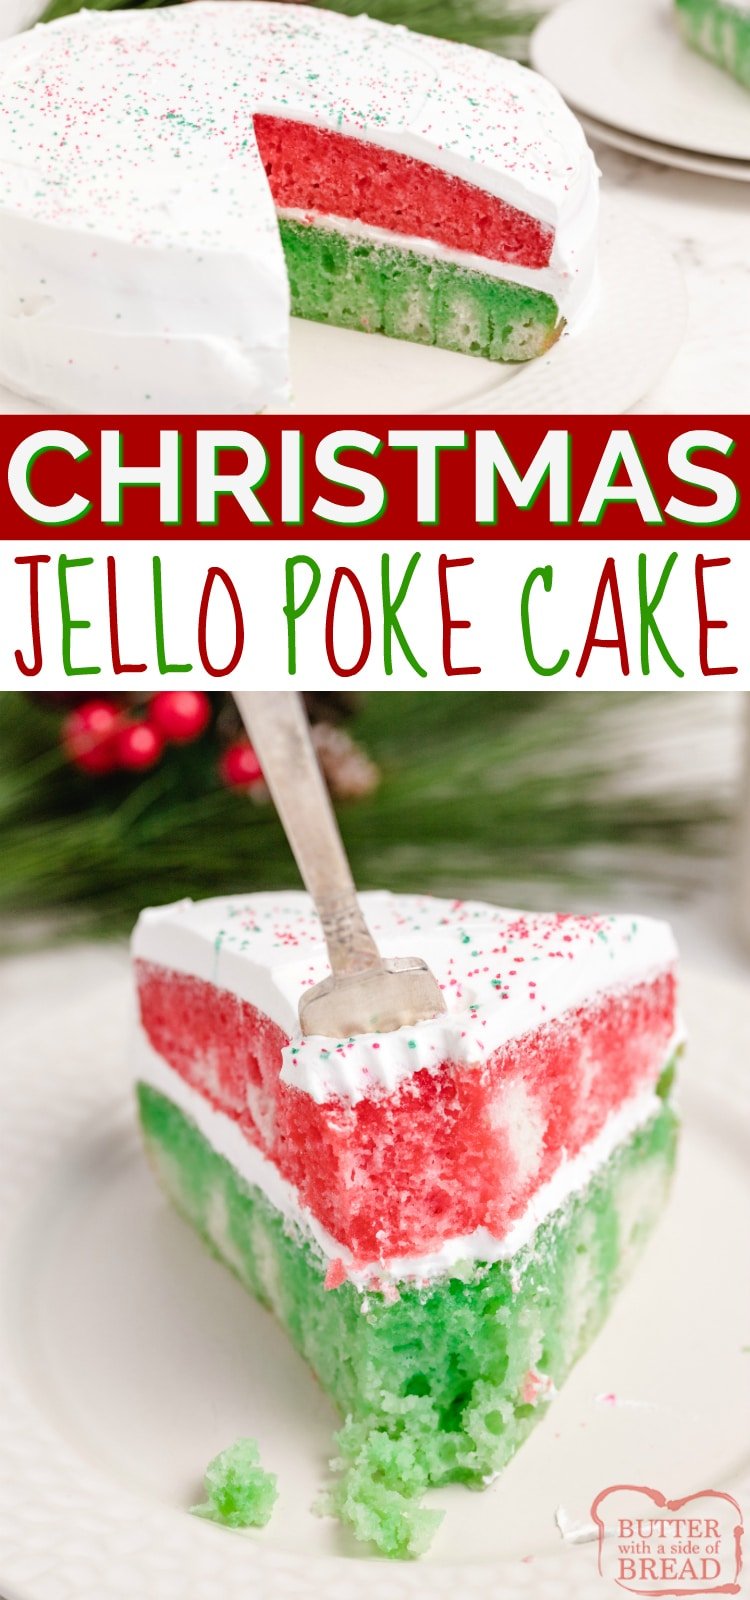 Christmas Jello Poke Cake uses a cake mix and red and green Jello to make a simple and delicious holiday dessert! This Christmas cake recipe is easy to make and absolutely beautiful to serve! 